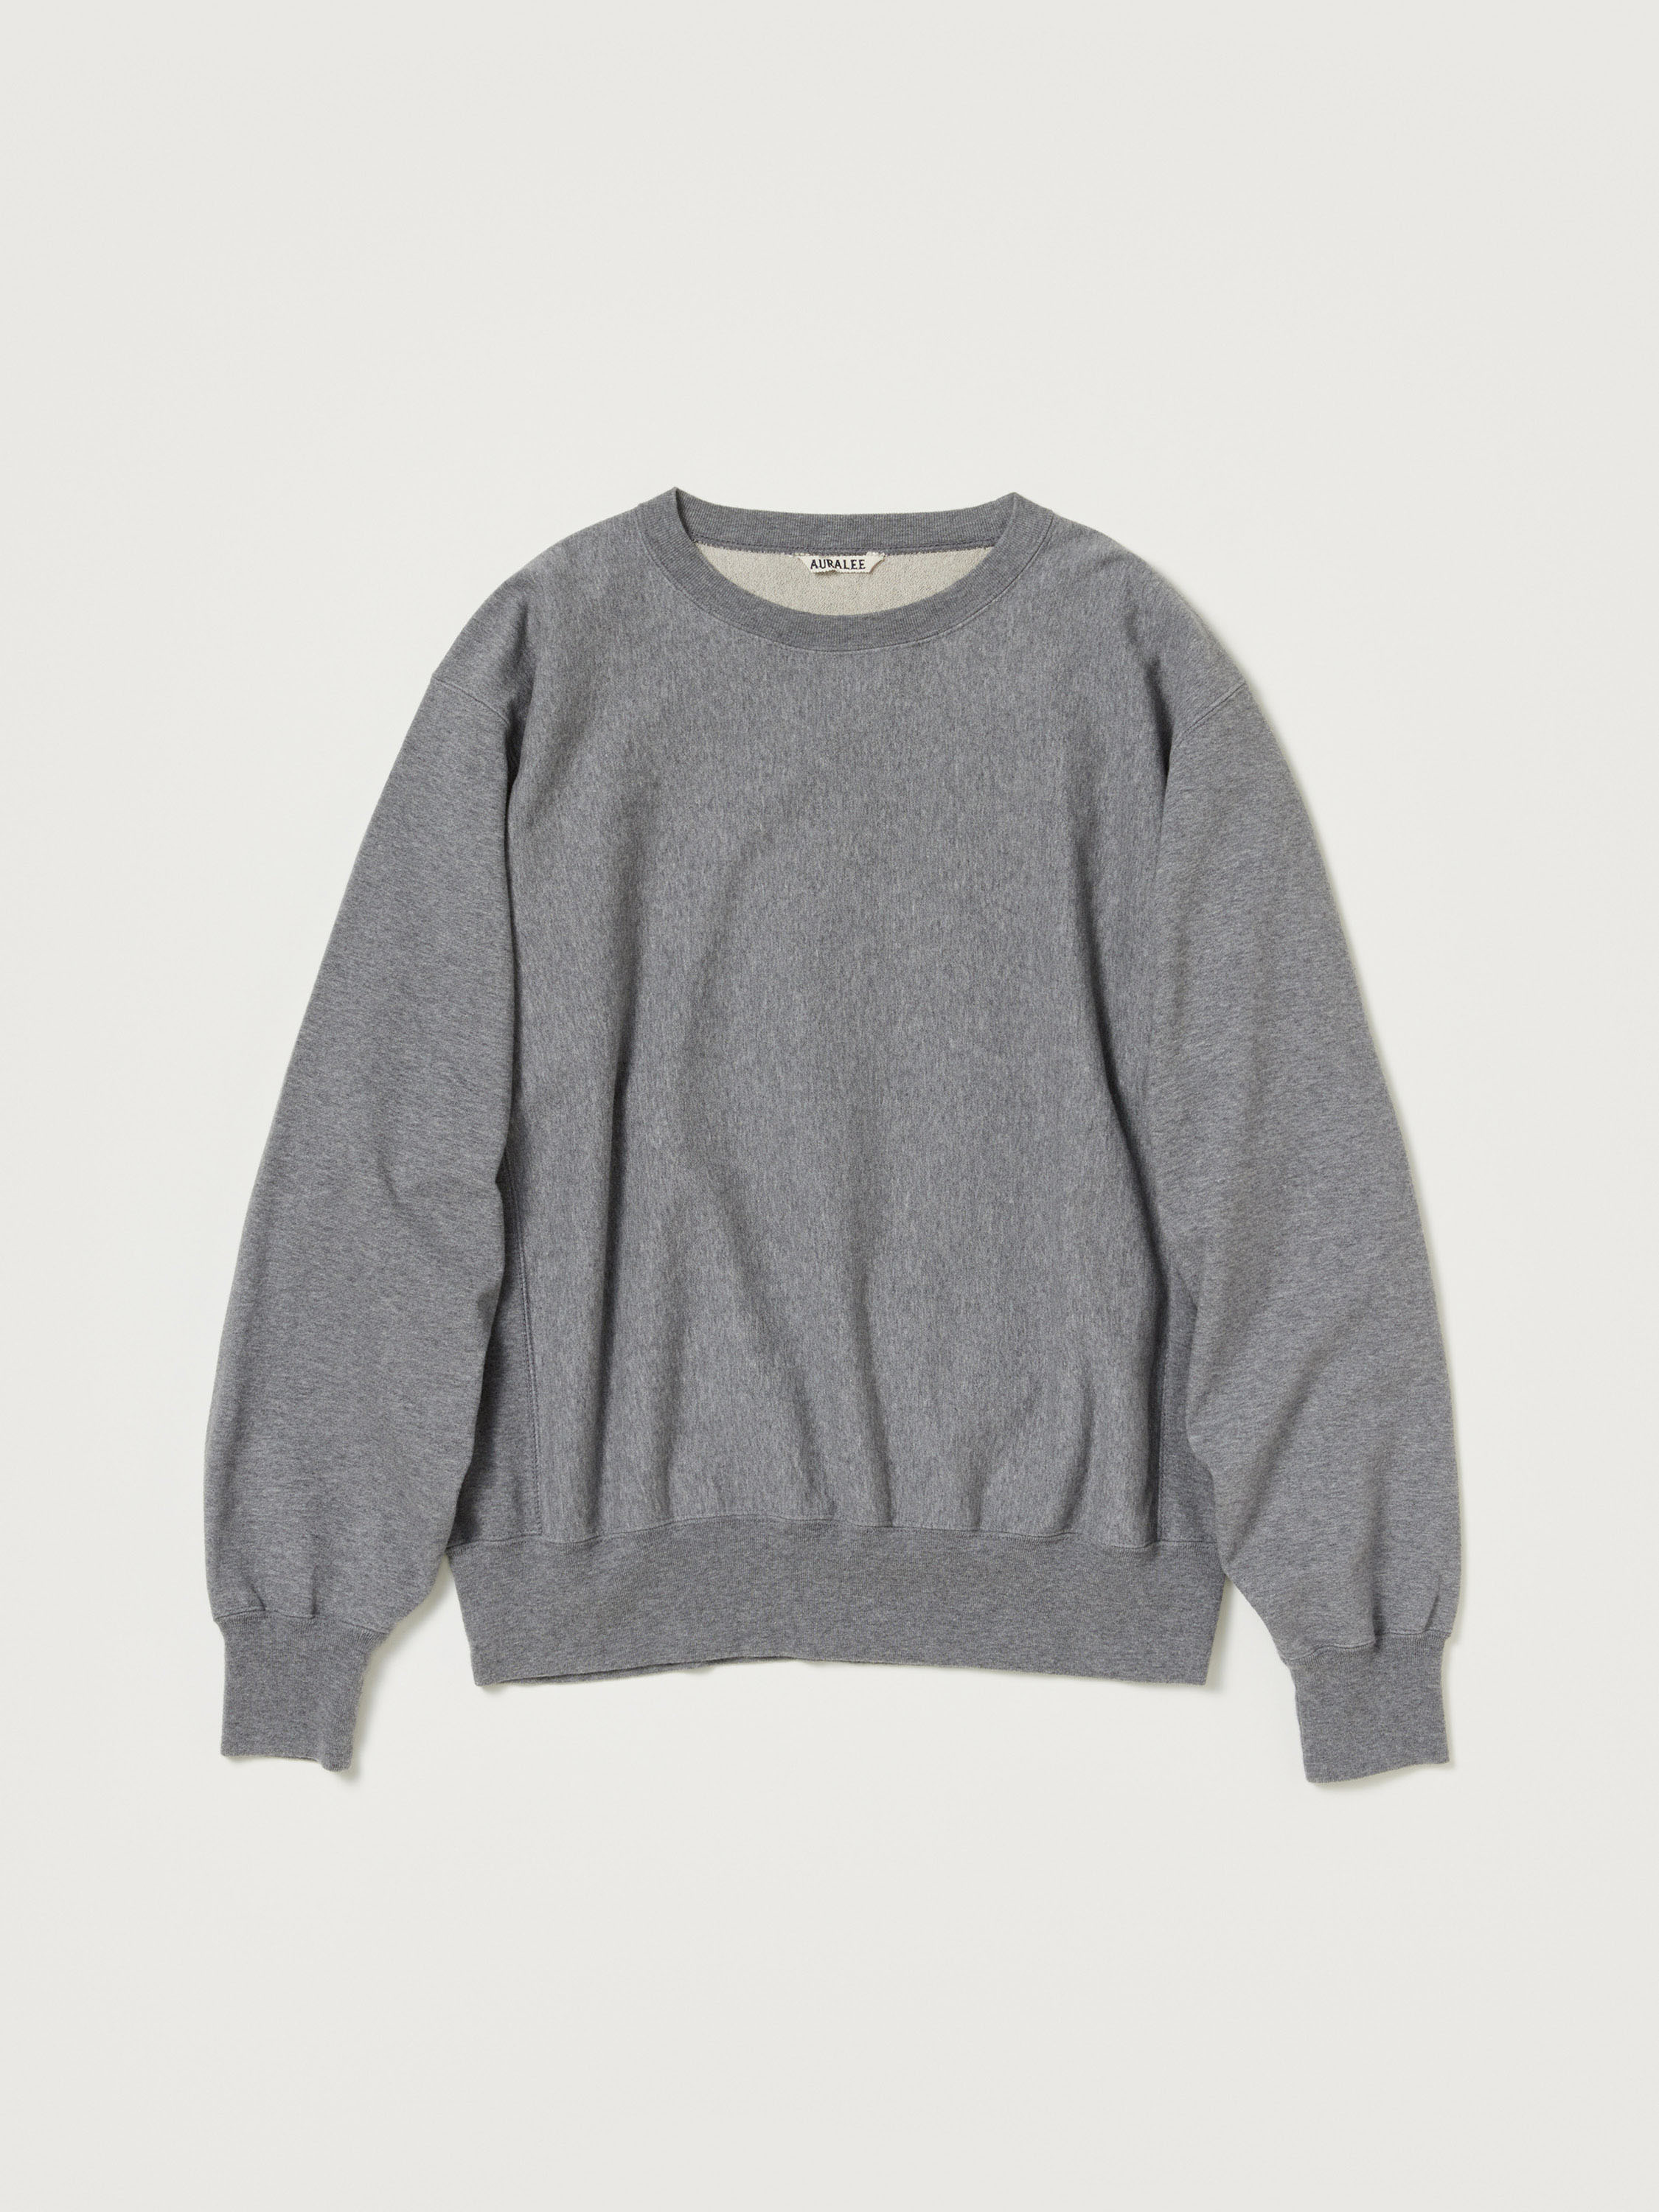 SUPER MILLED SWEAT P/O 詳細画像 TOP CHARCOAL 2